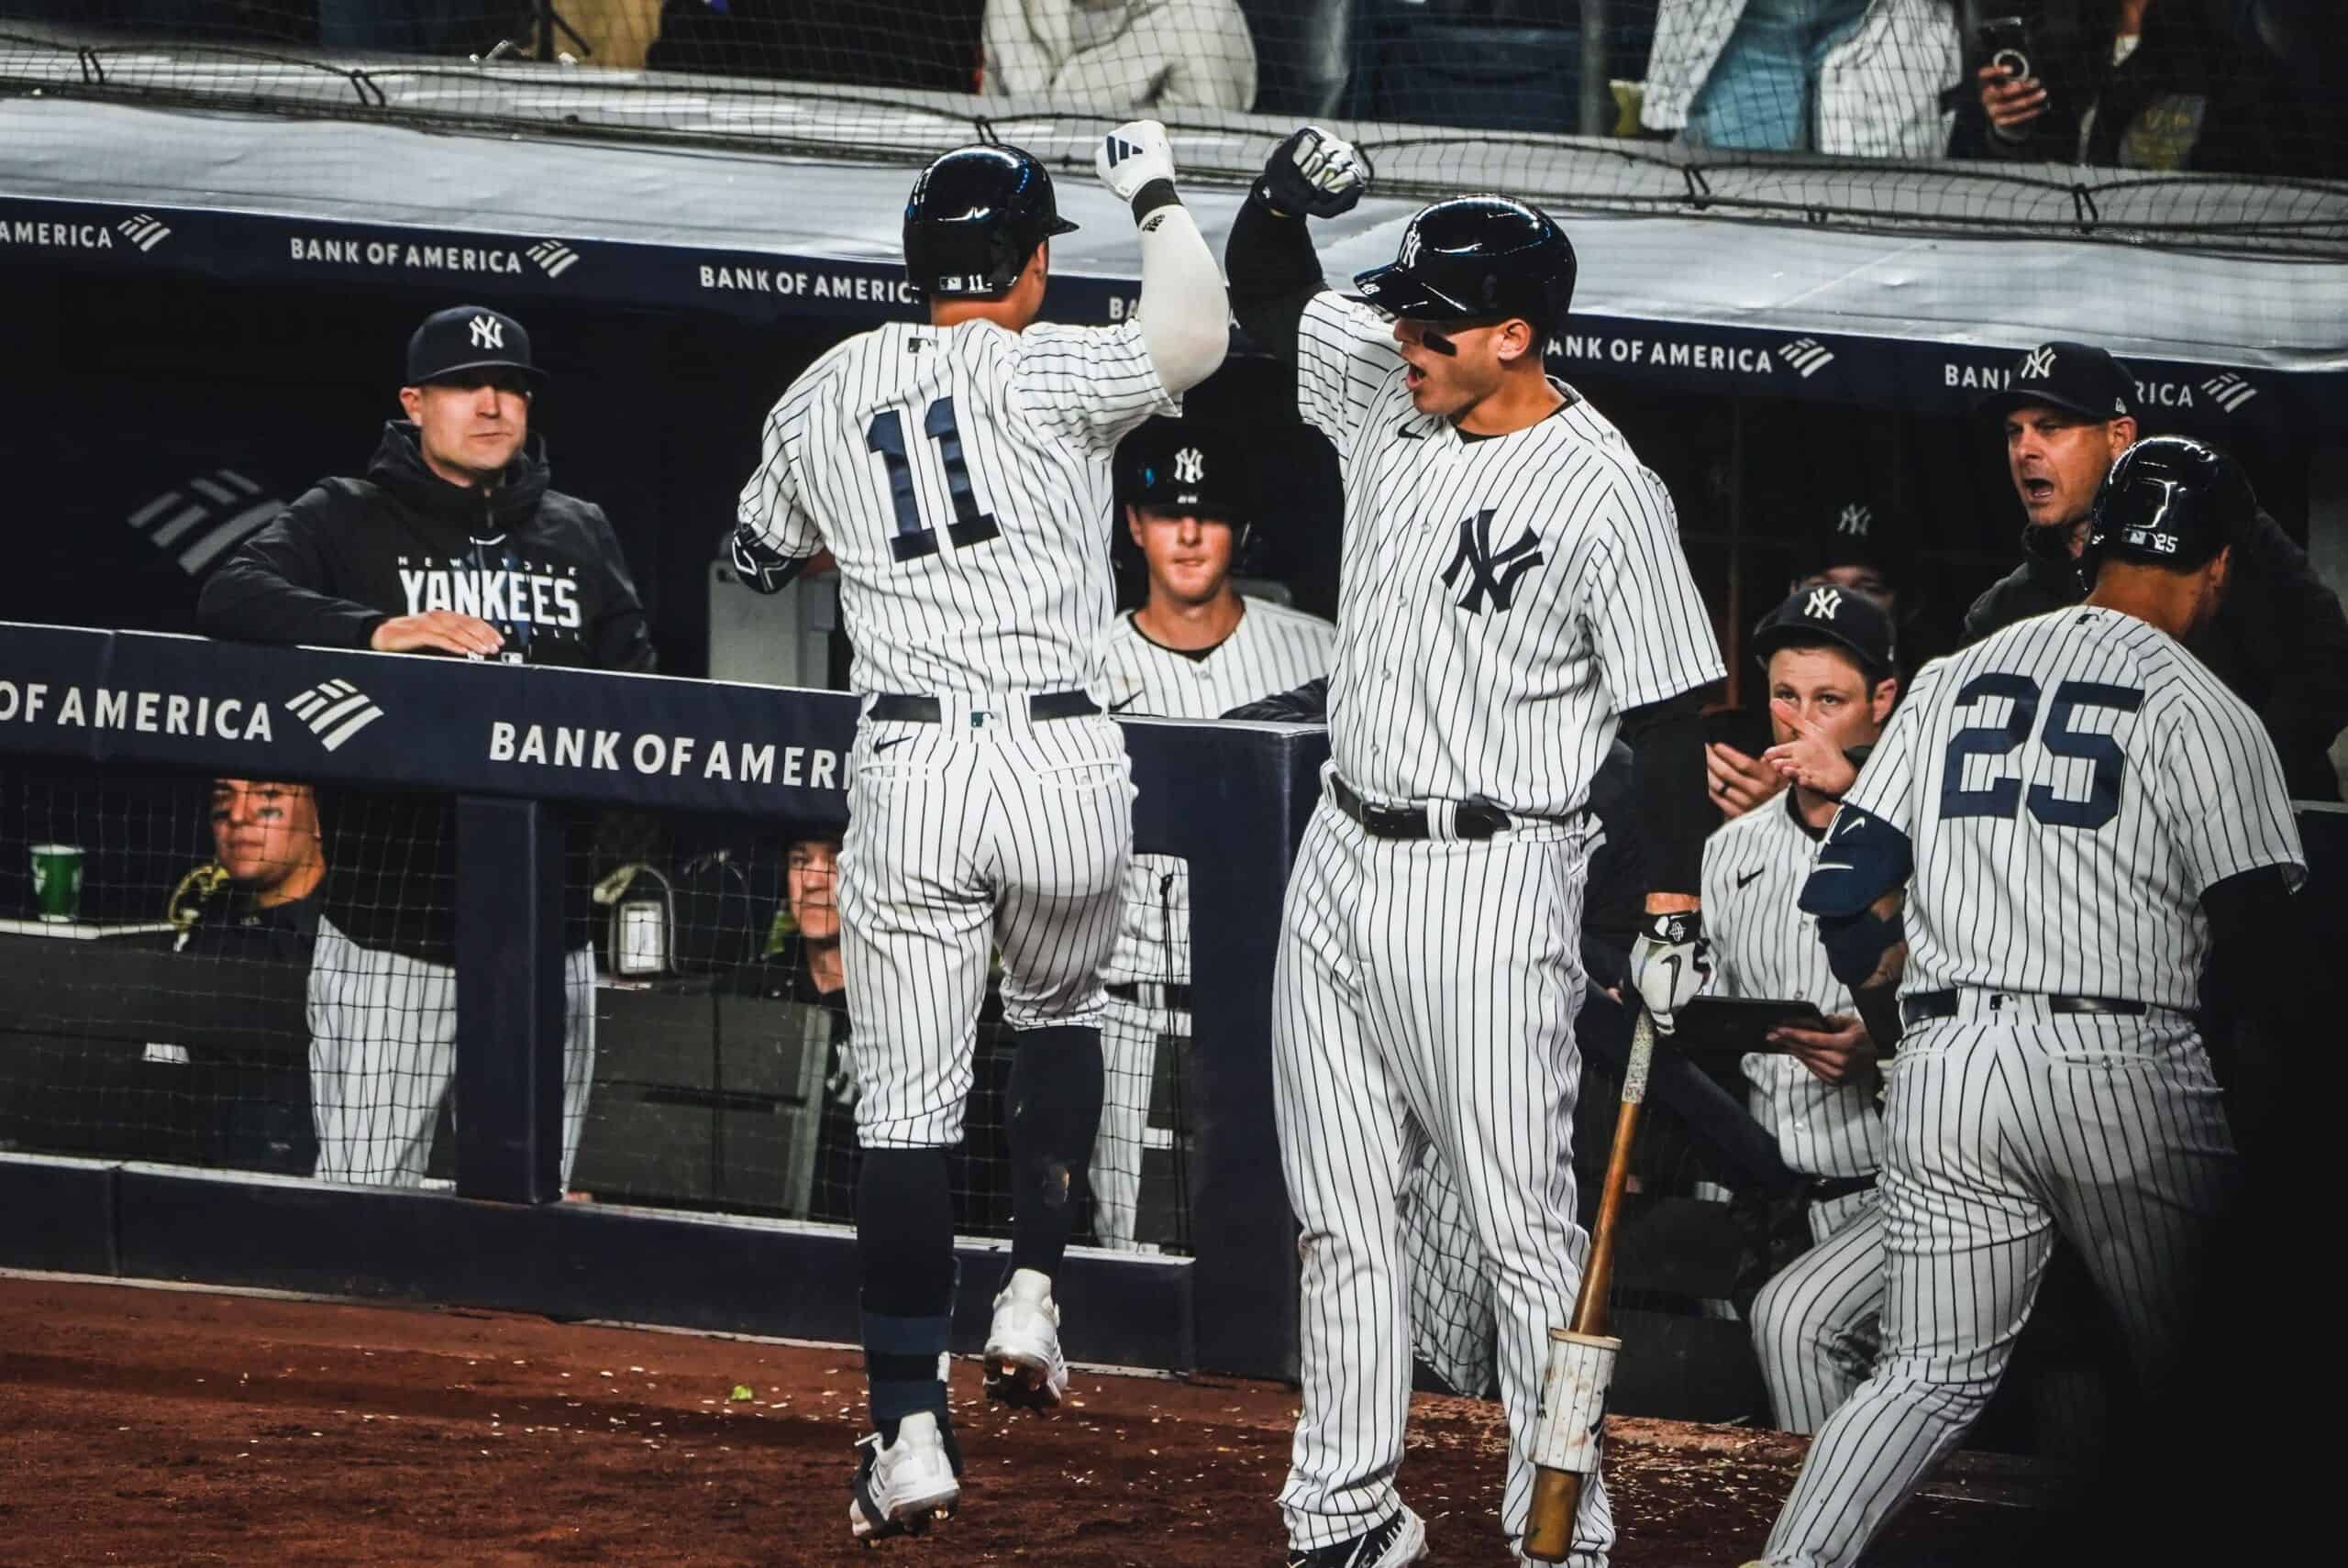 Willie Calhoun helps Yankees top Guardians, end four-game skid